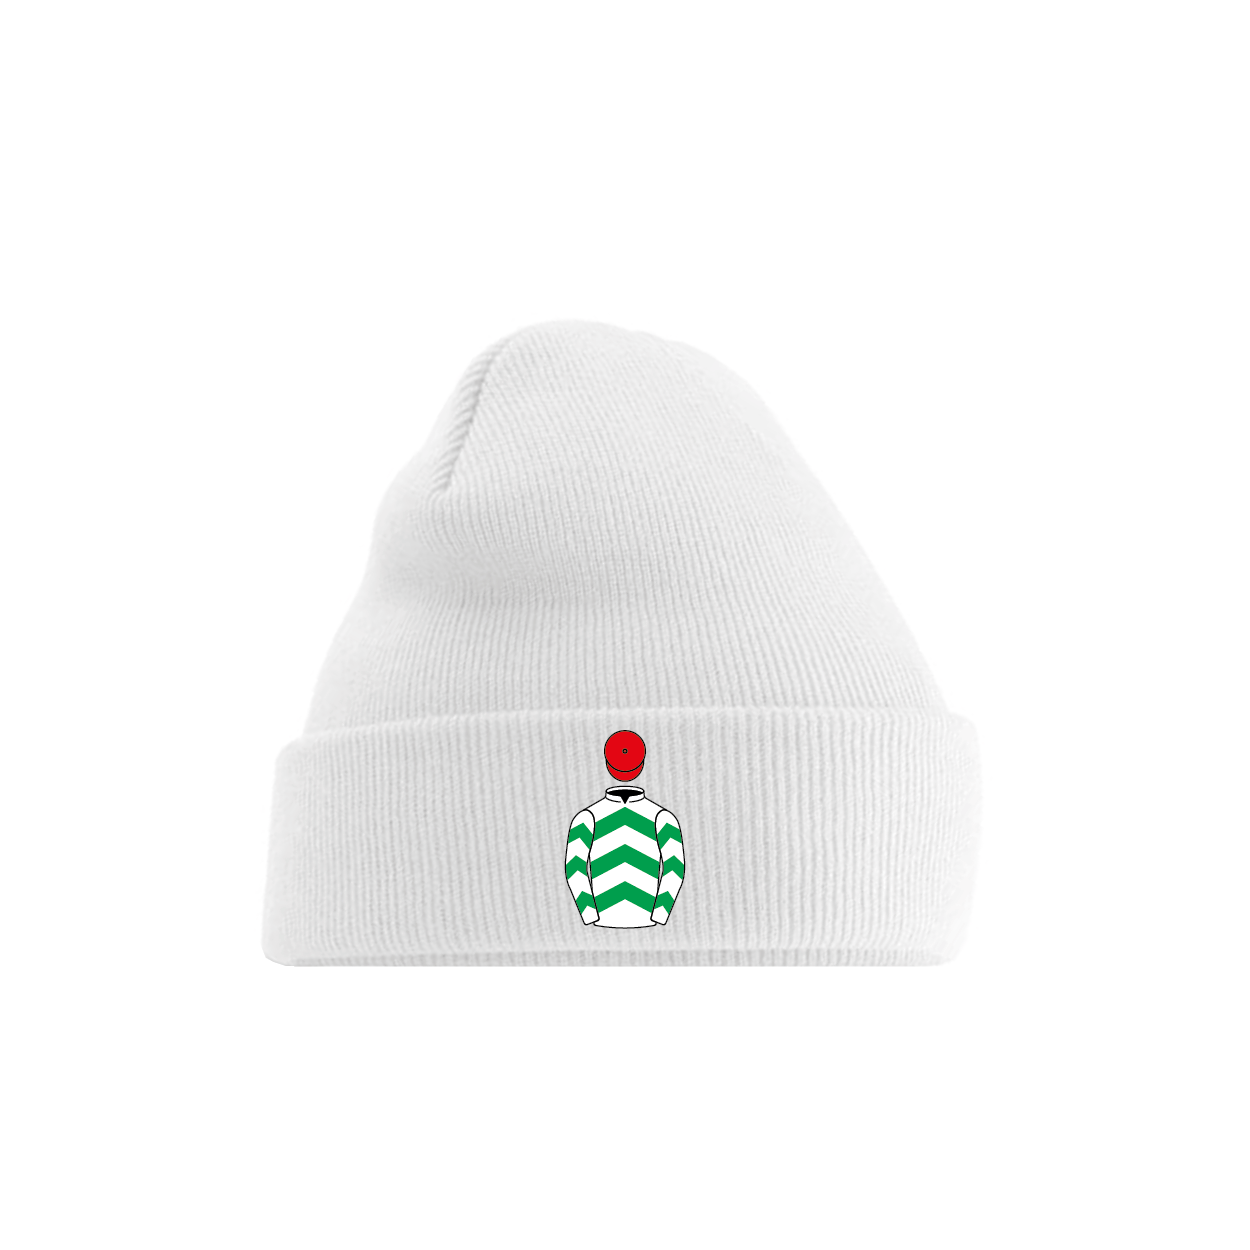 Bective Stud Embroidered Cuffed Beanie - Hacked Up